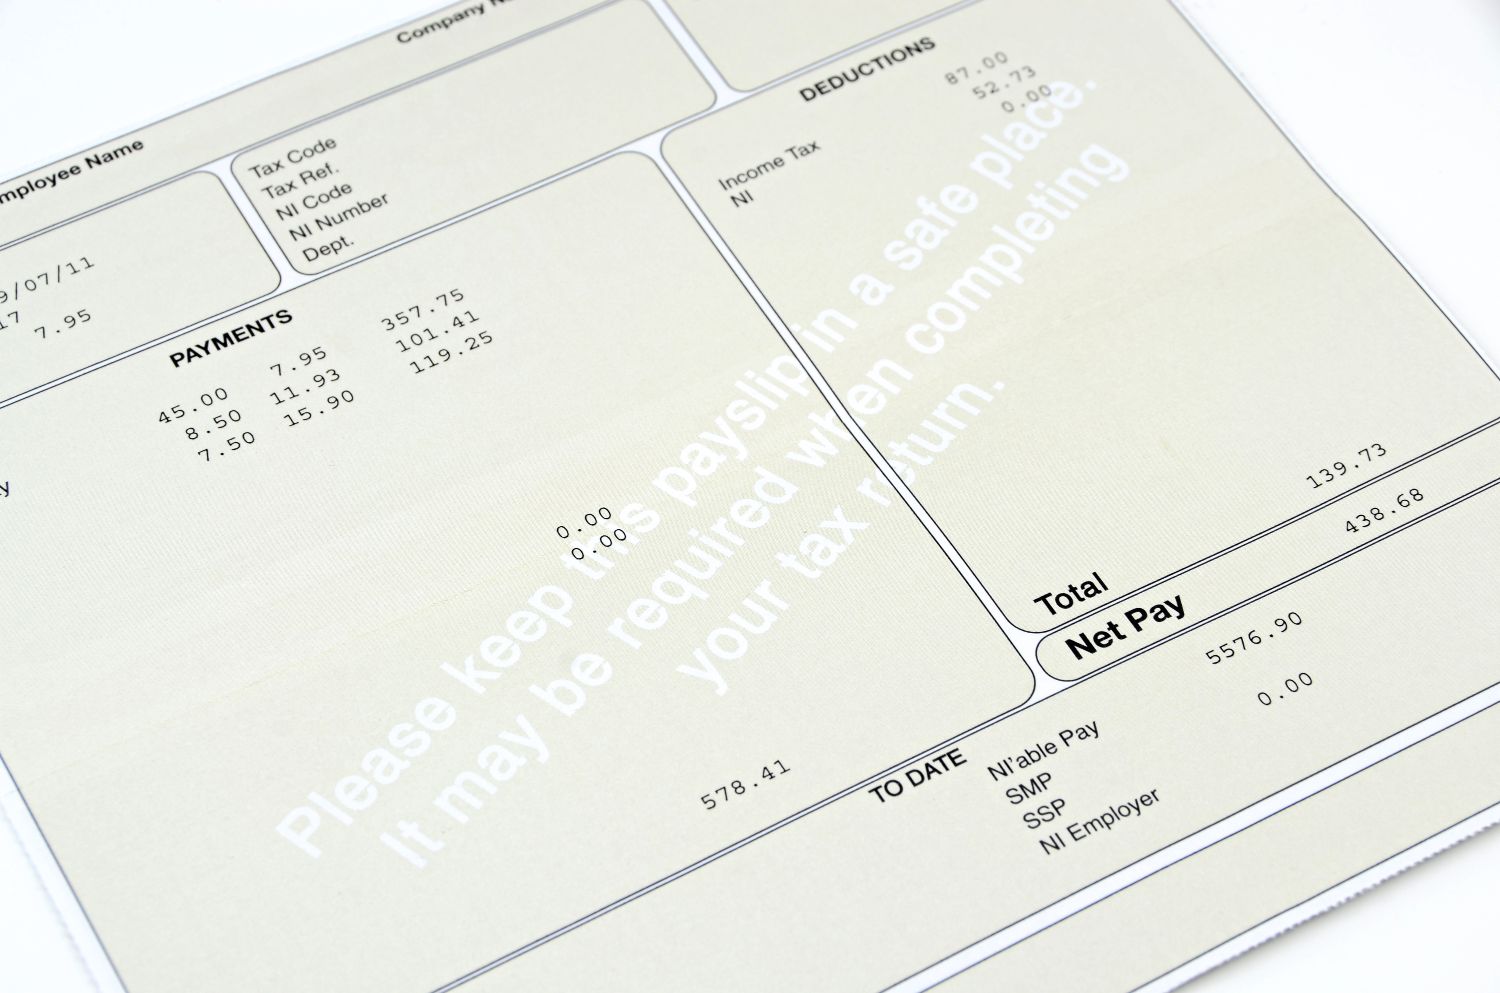 Image of a paycheck stub printed on white paper